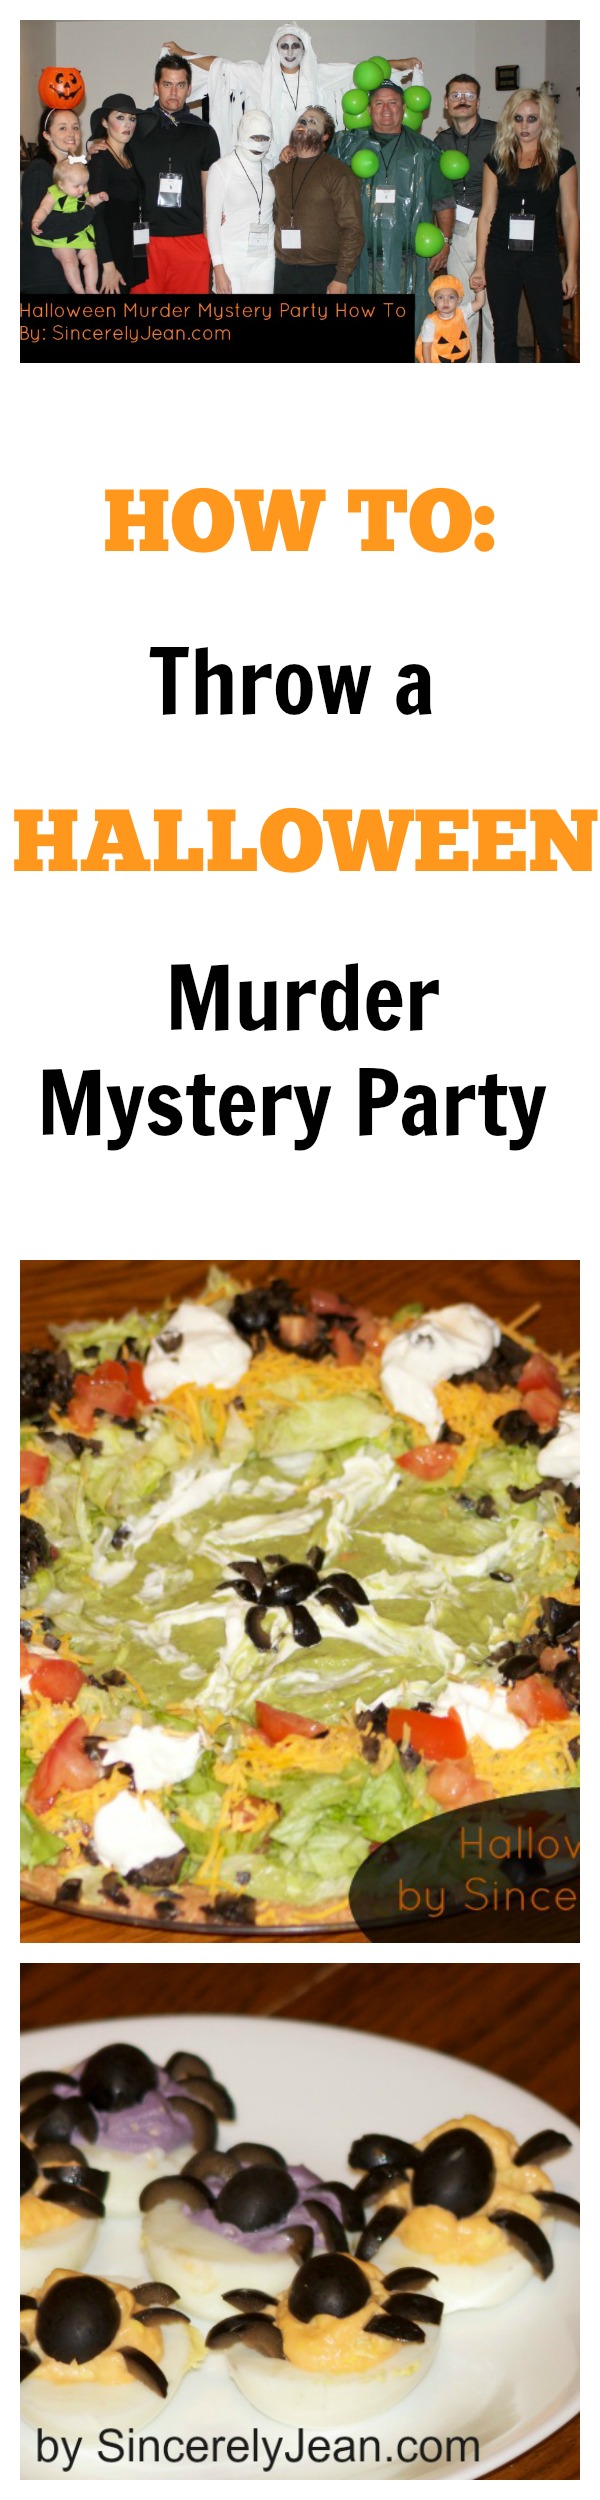 murder_mystery_party_